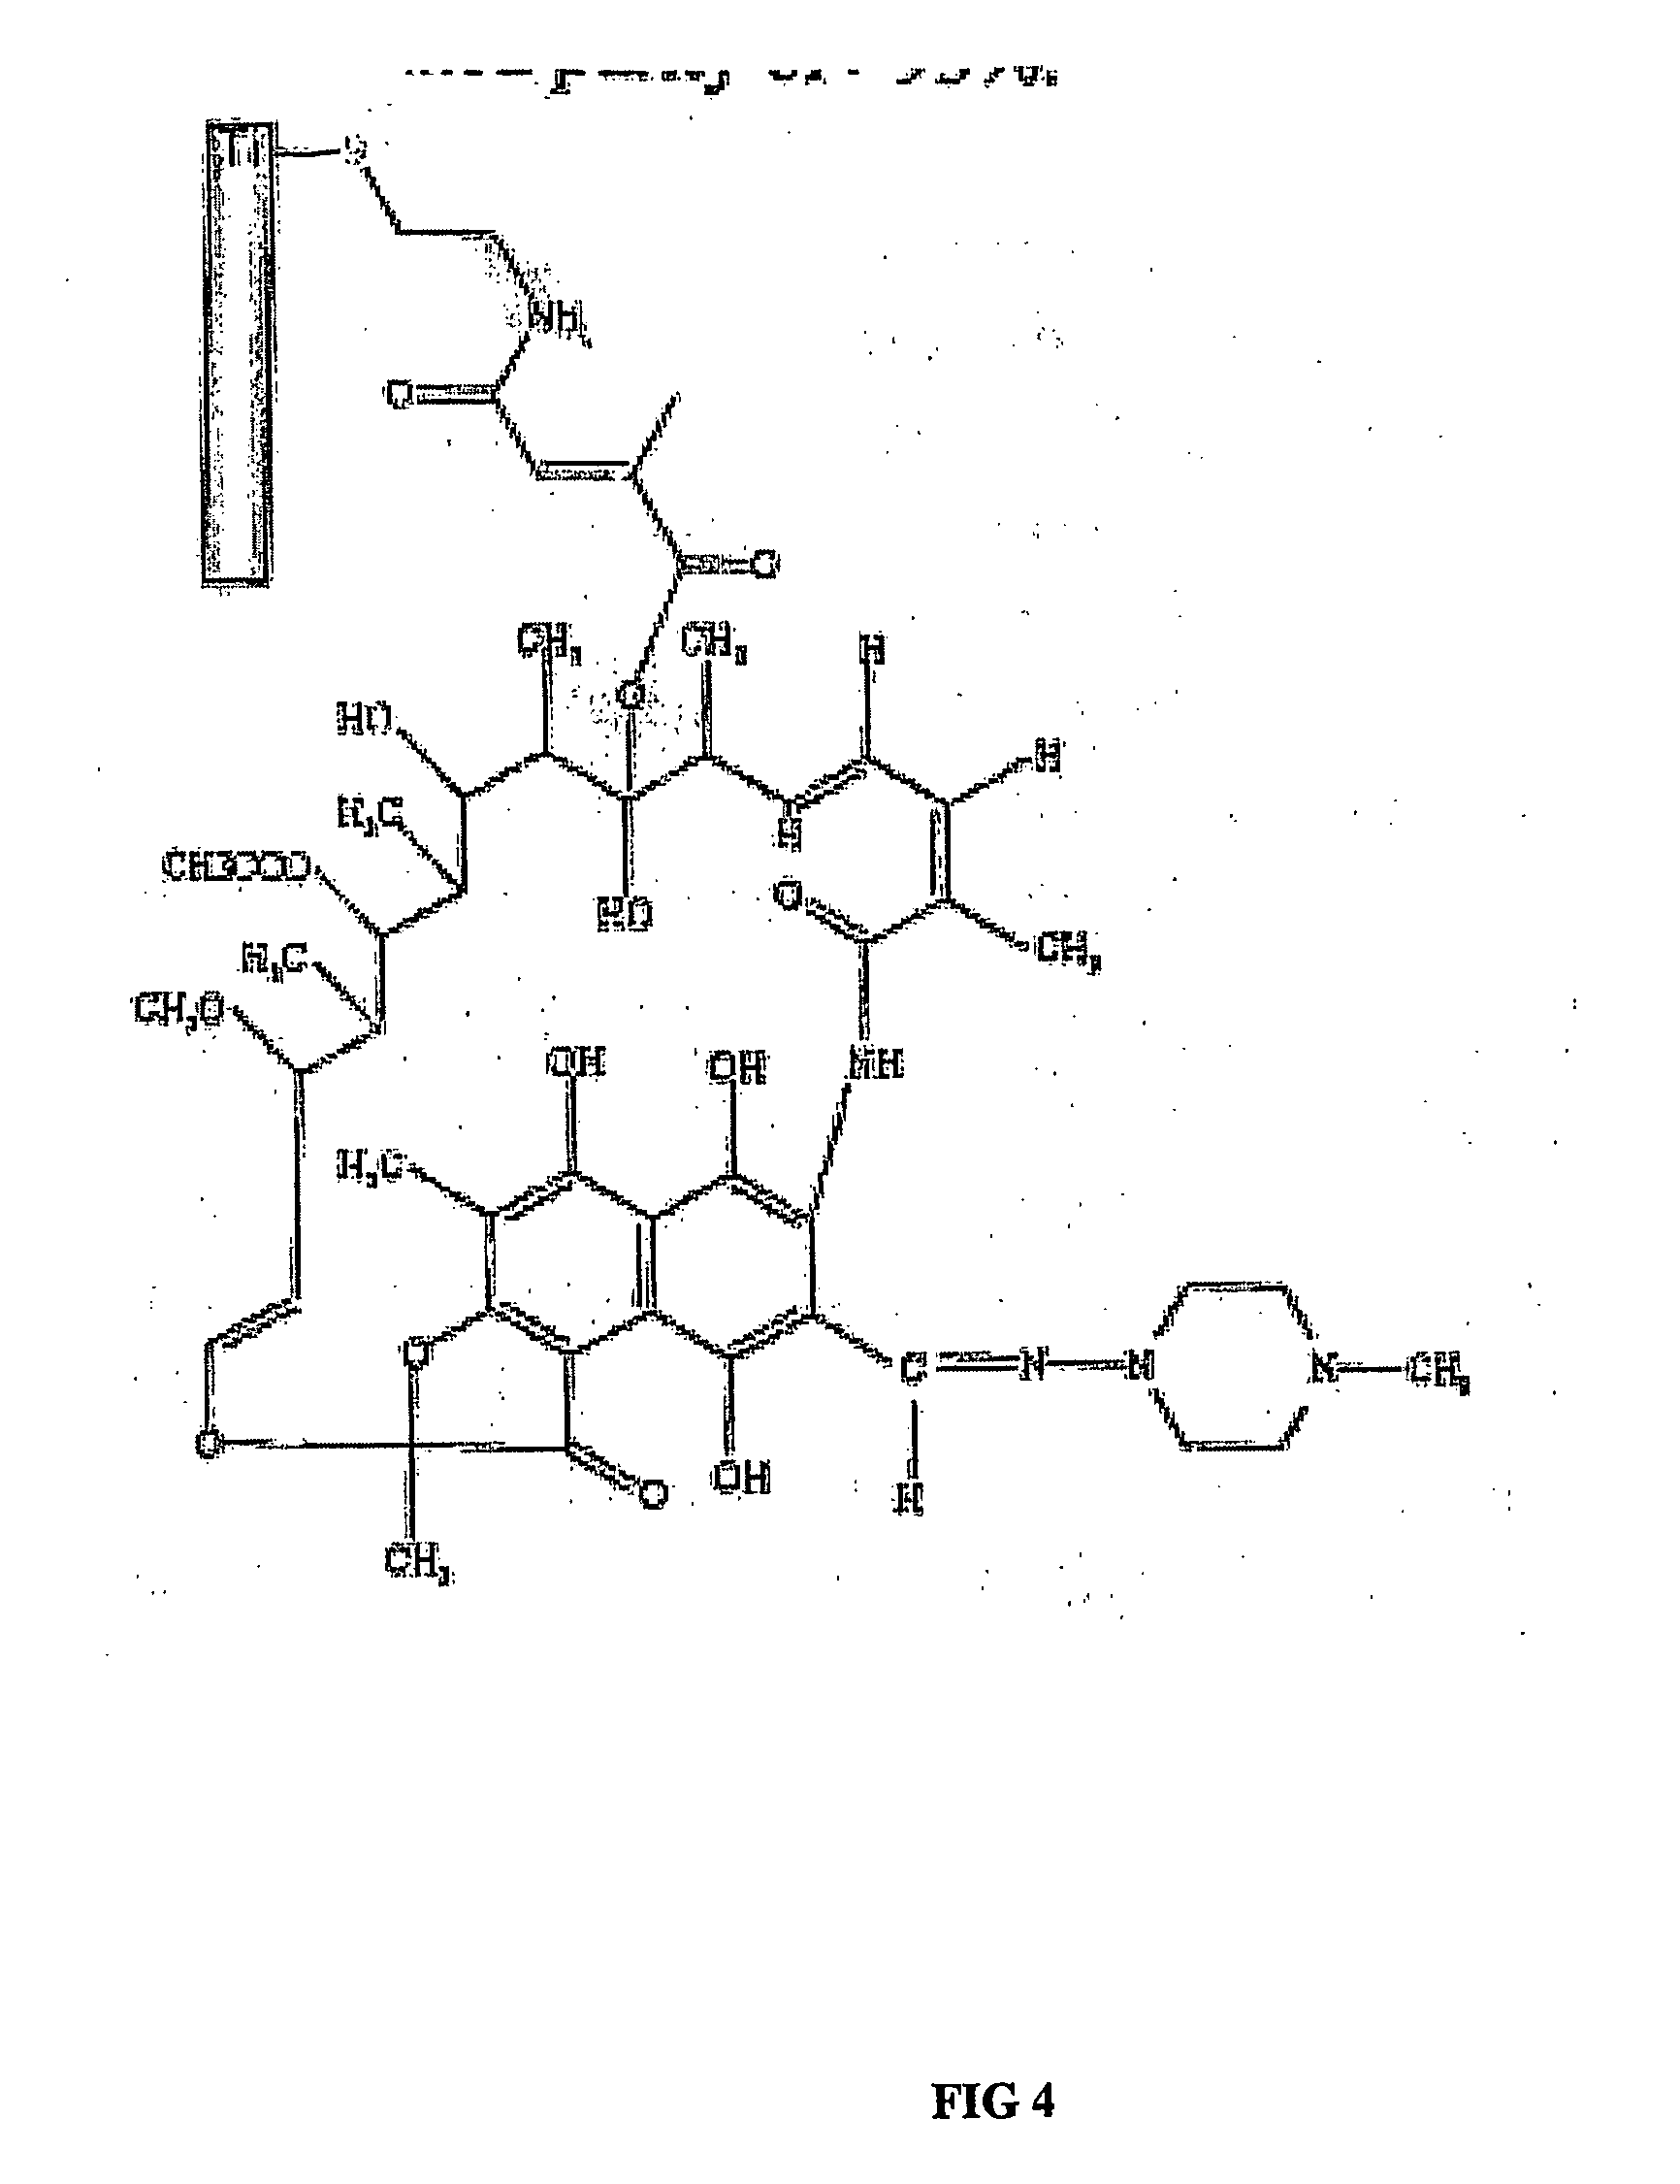 Implants with attached silylated therapeutic agents